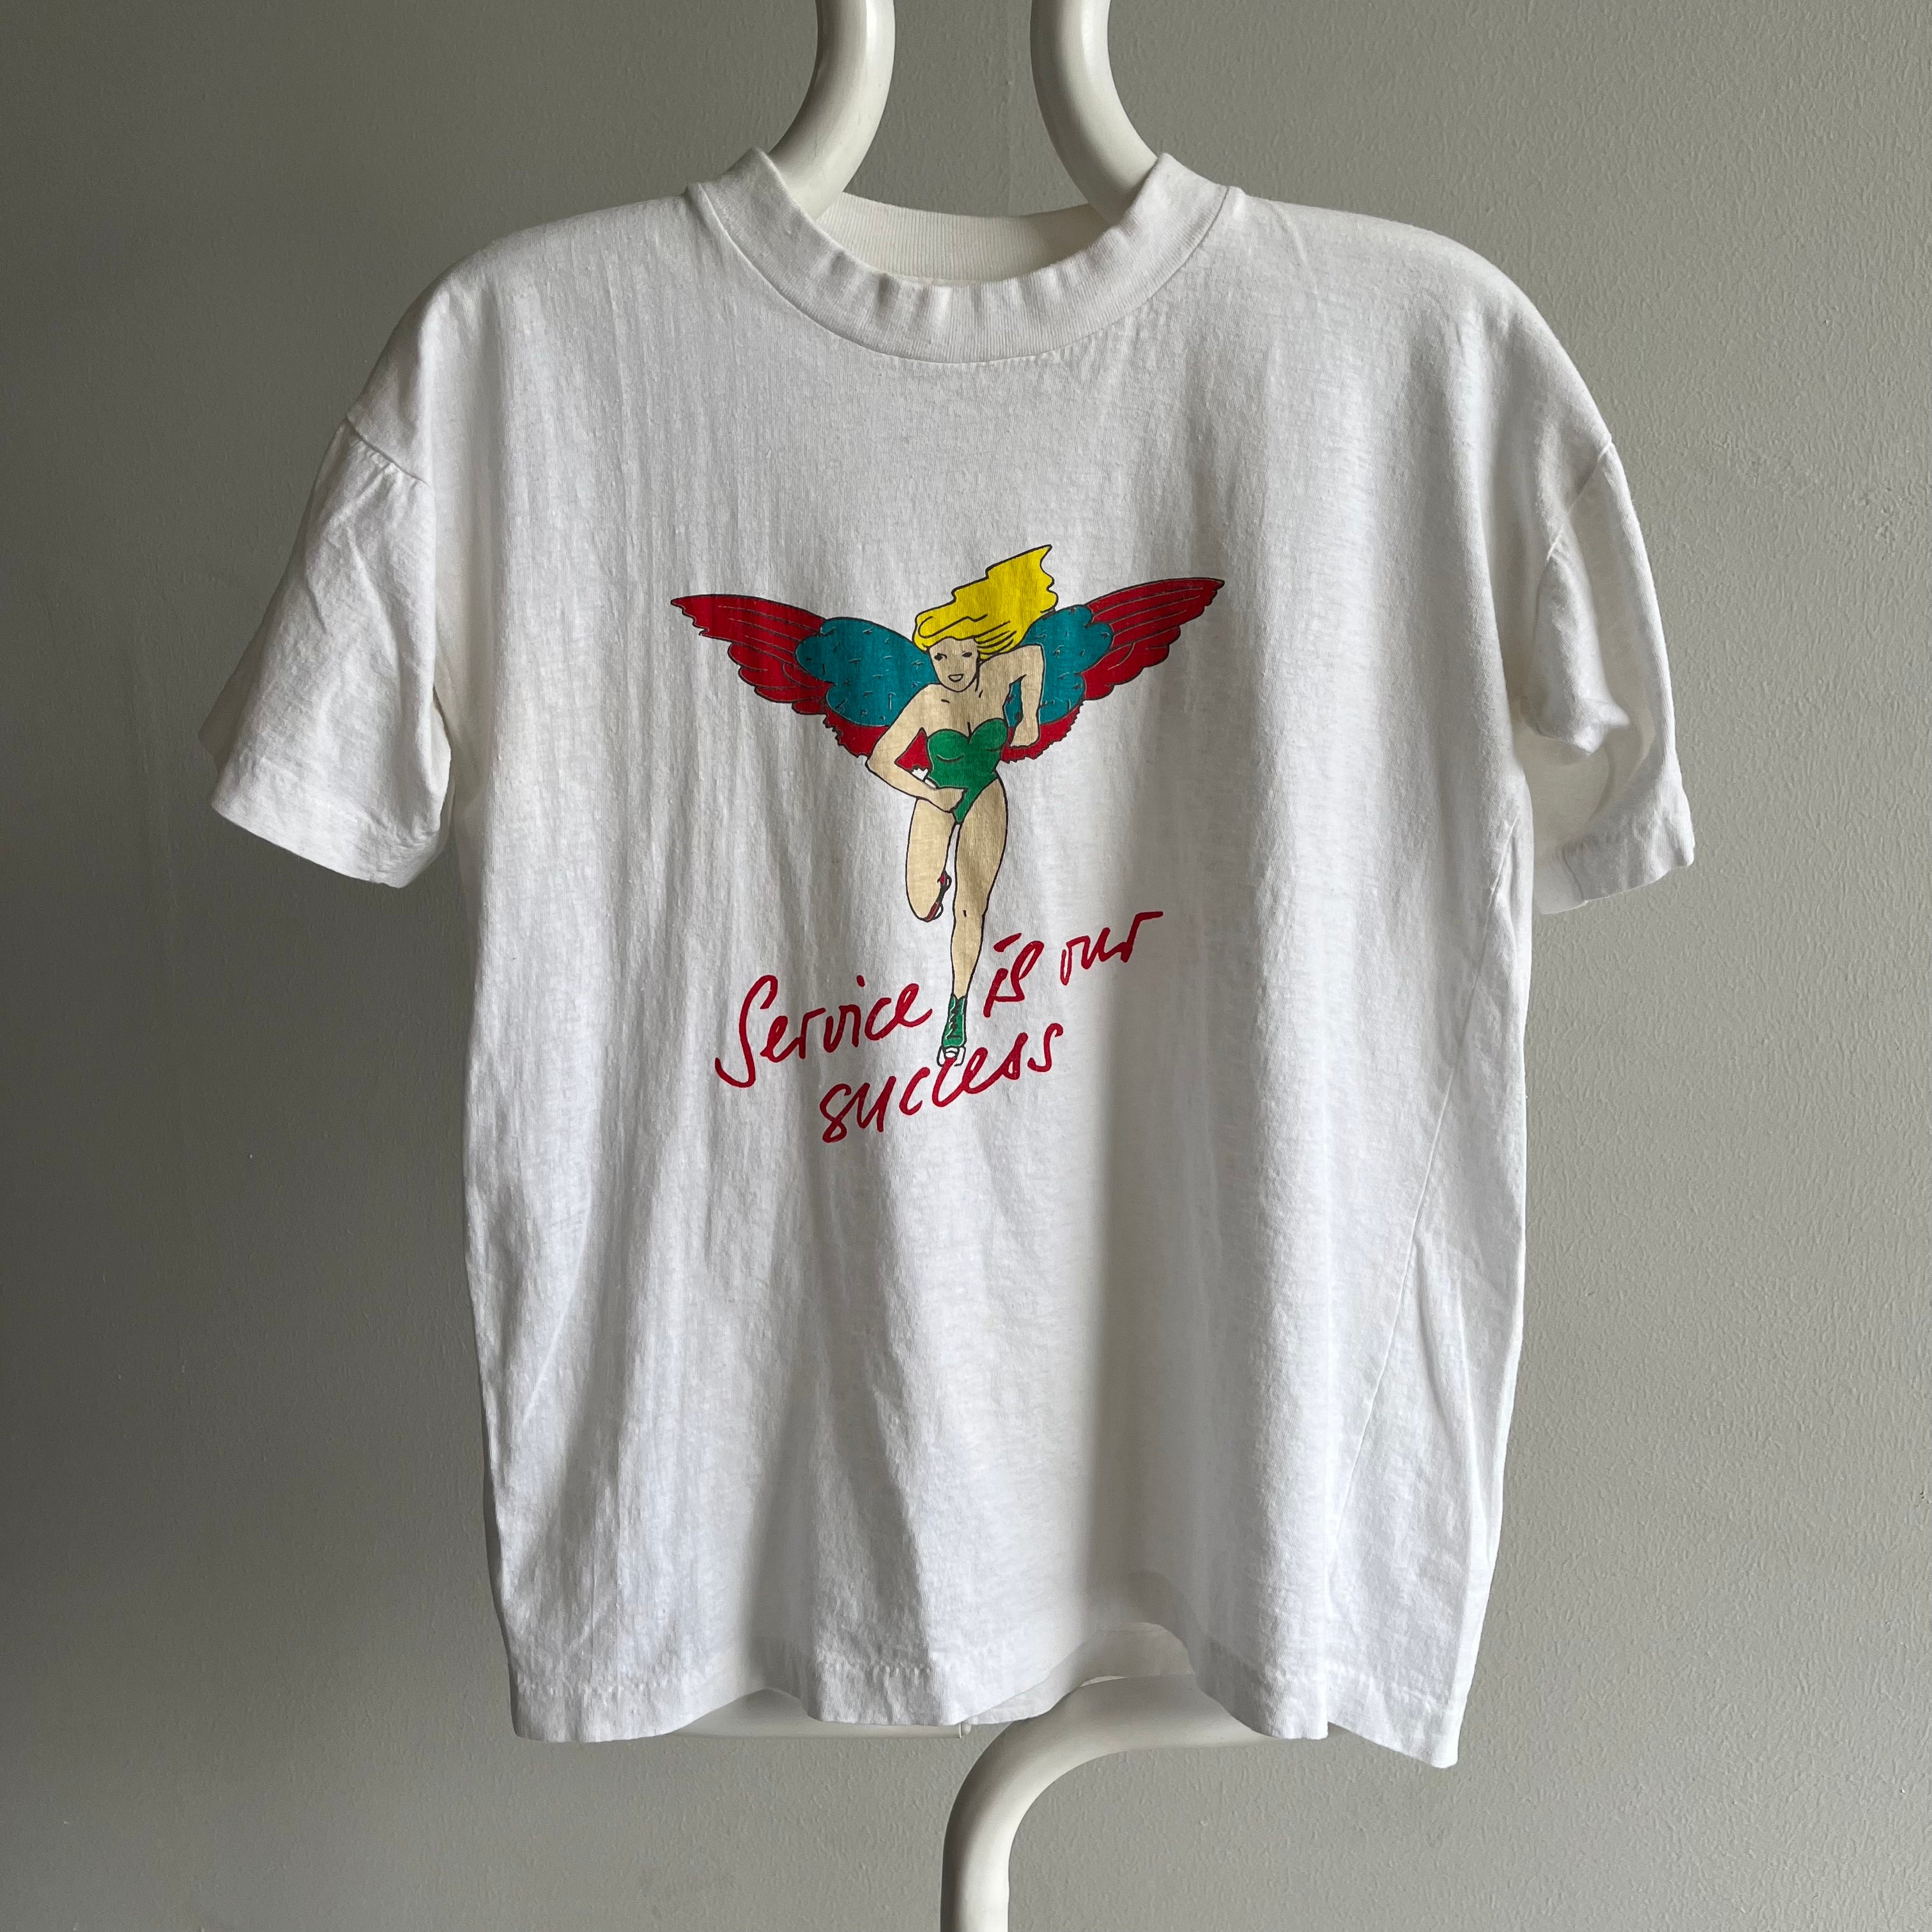 1980s Service Is Our Success - Lauda-Air Advertising T-Shirt